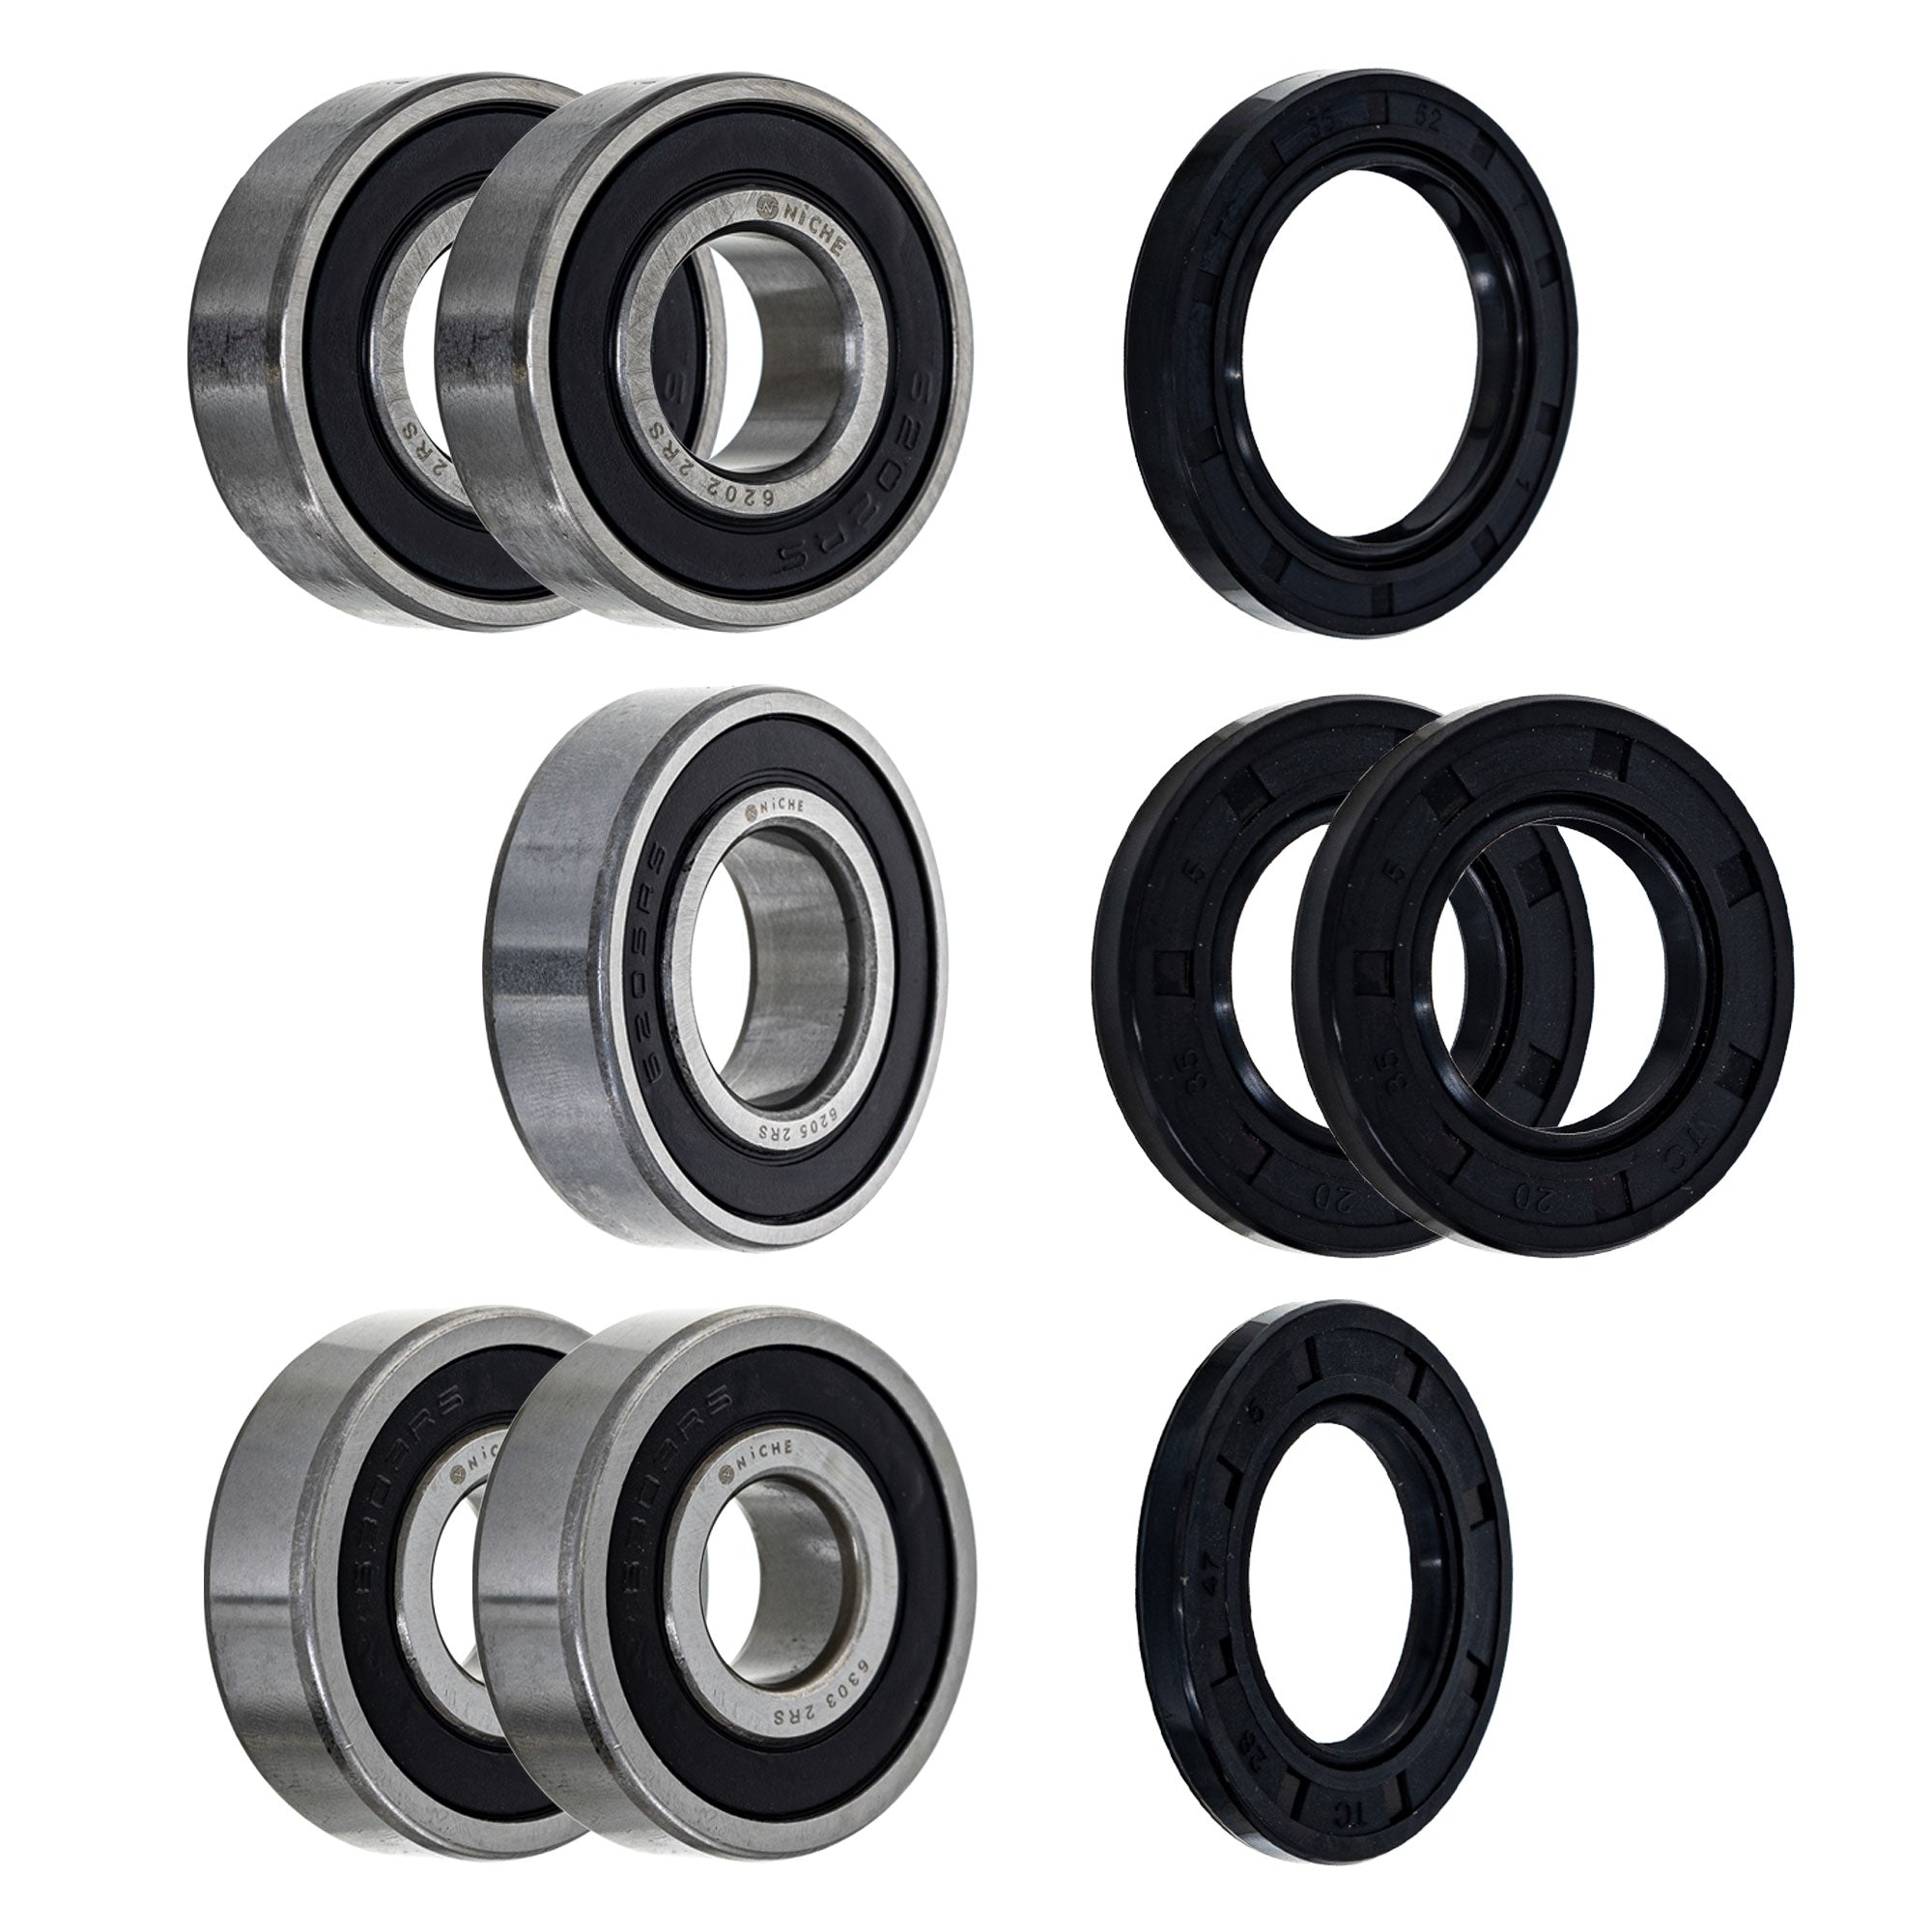 Wheel Bearing Seal Kit for zOTHER Ref No W650 NICHE MK1008545